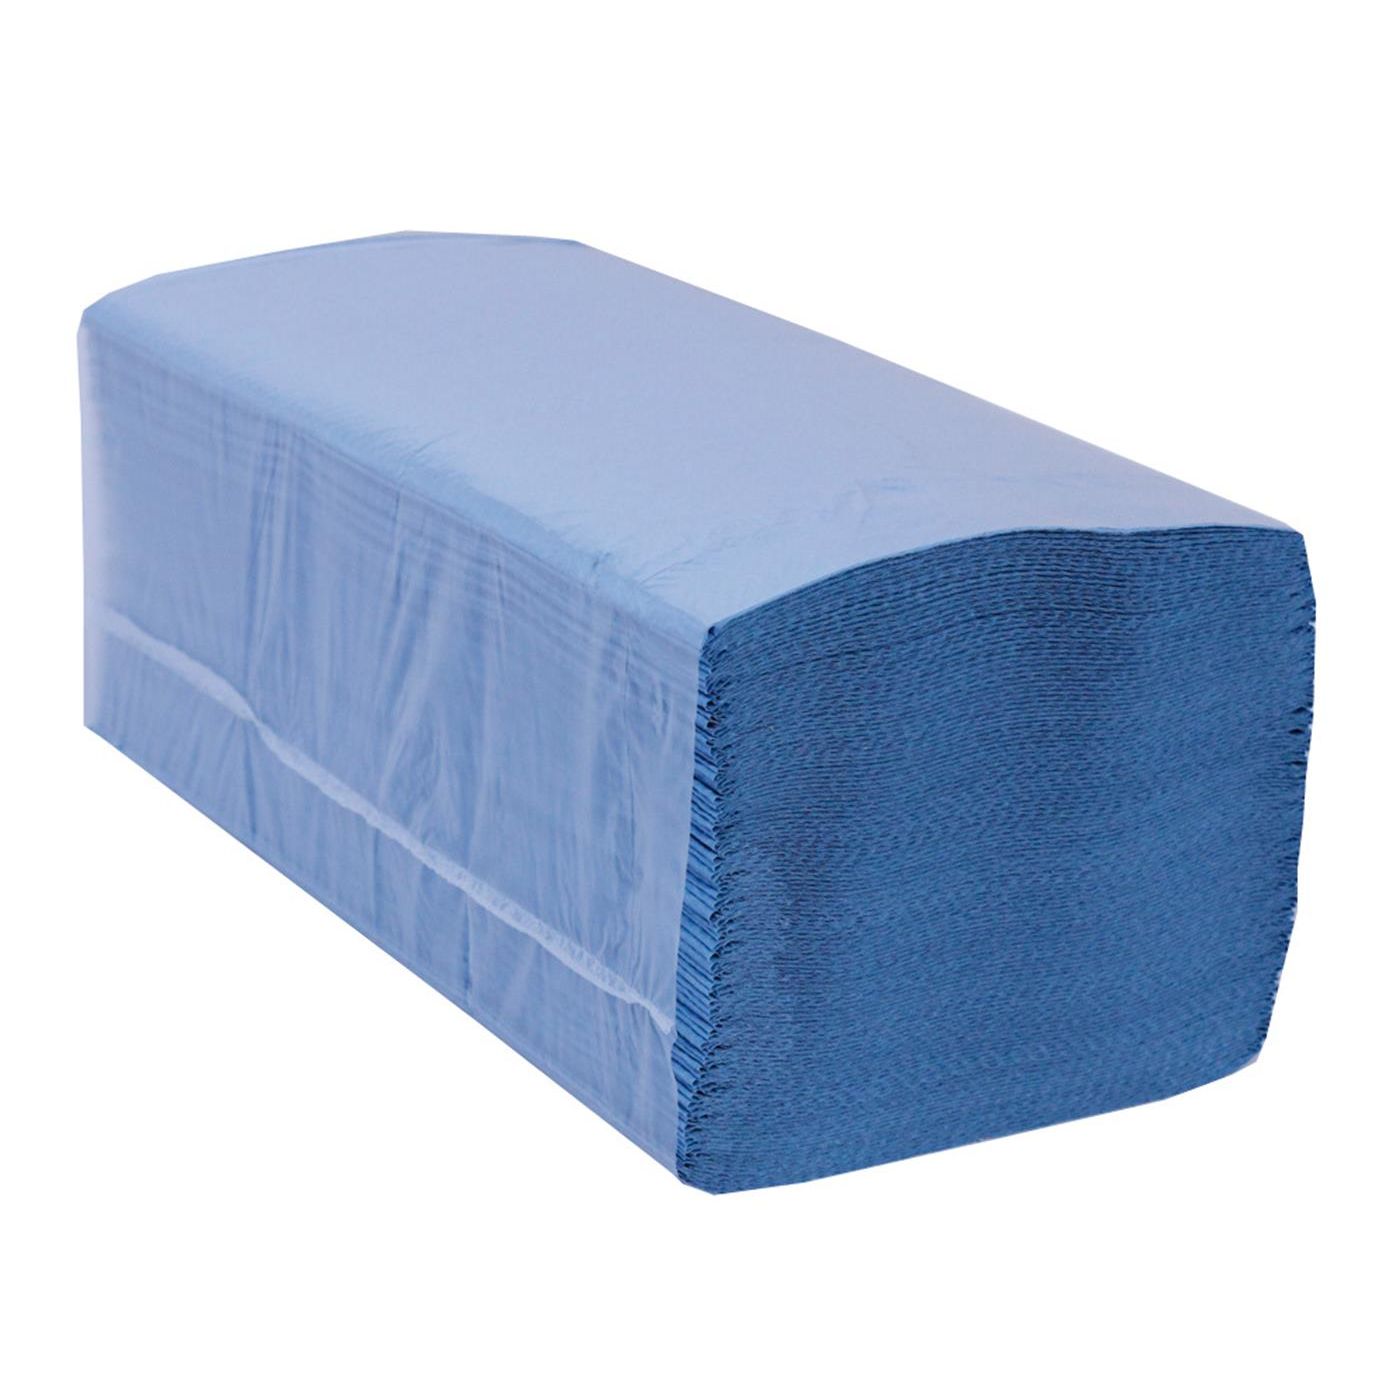 PRO Eco Easipull V-Fold 1 Ply 100% Recycled Hand Towels Case of 3600 Towels Blue